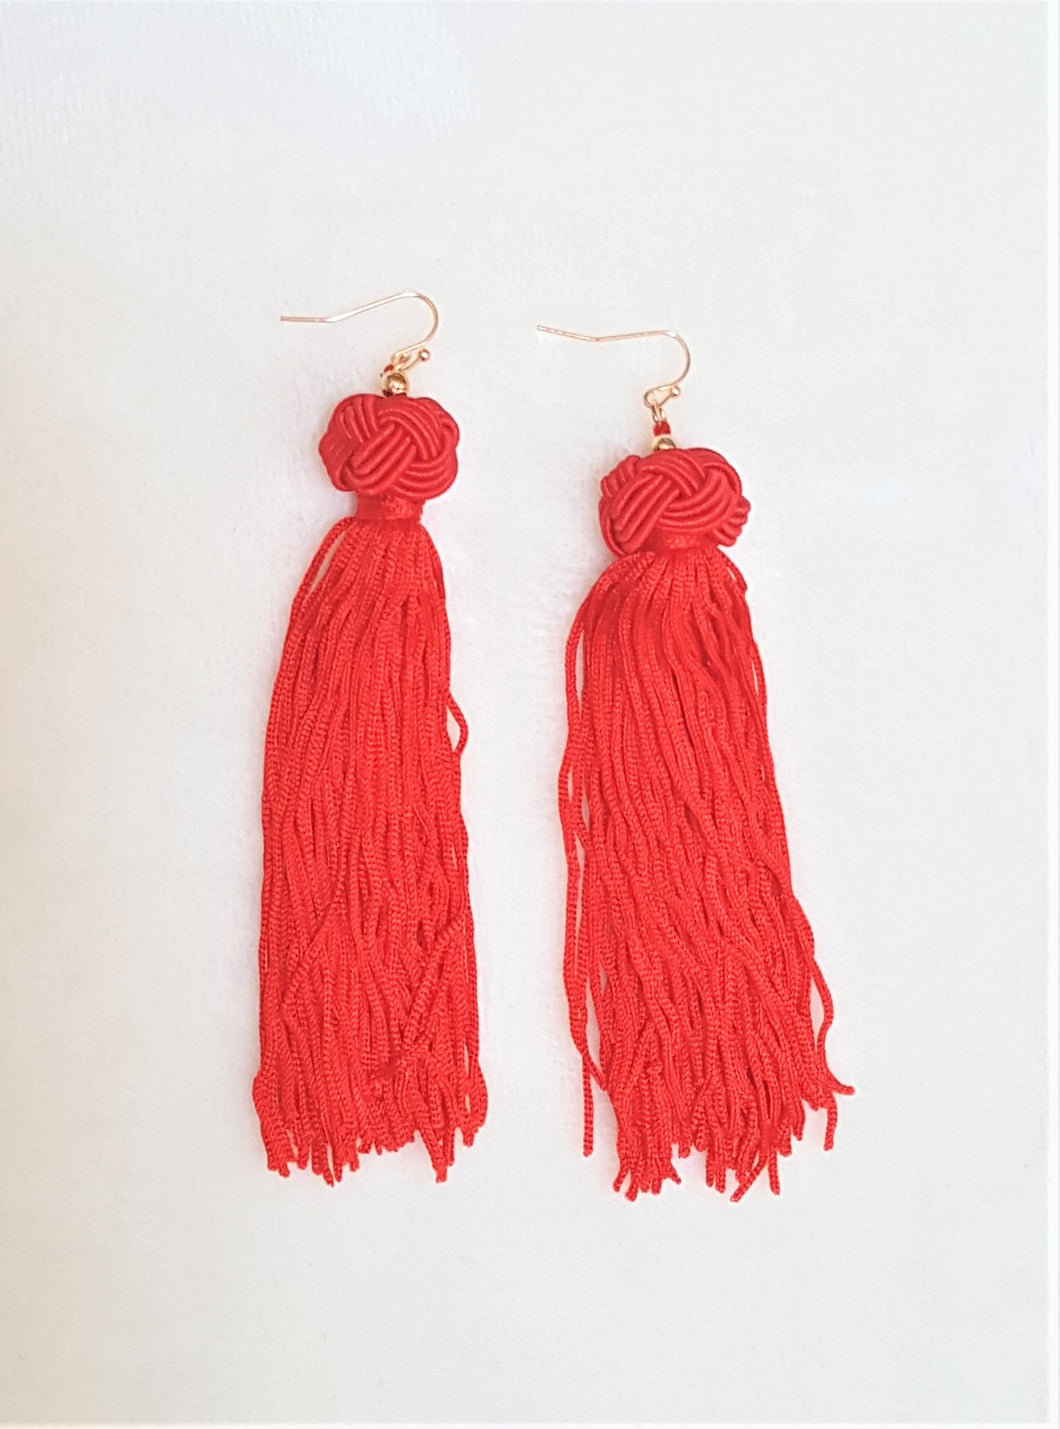 Earrings Knotted Tassel Red by UrbanFlair - Urban Flair USA